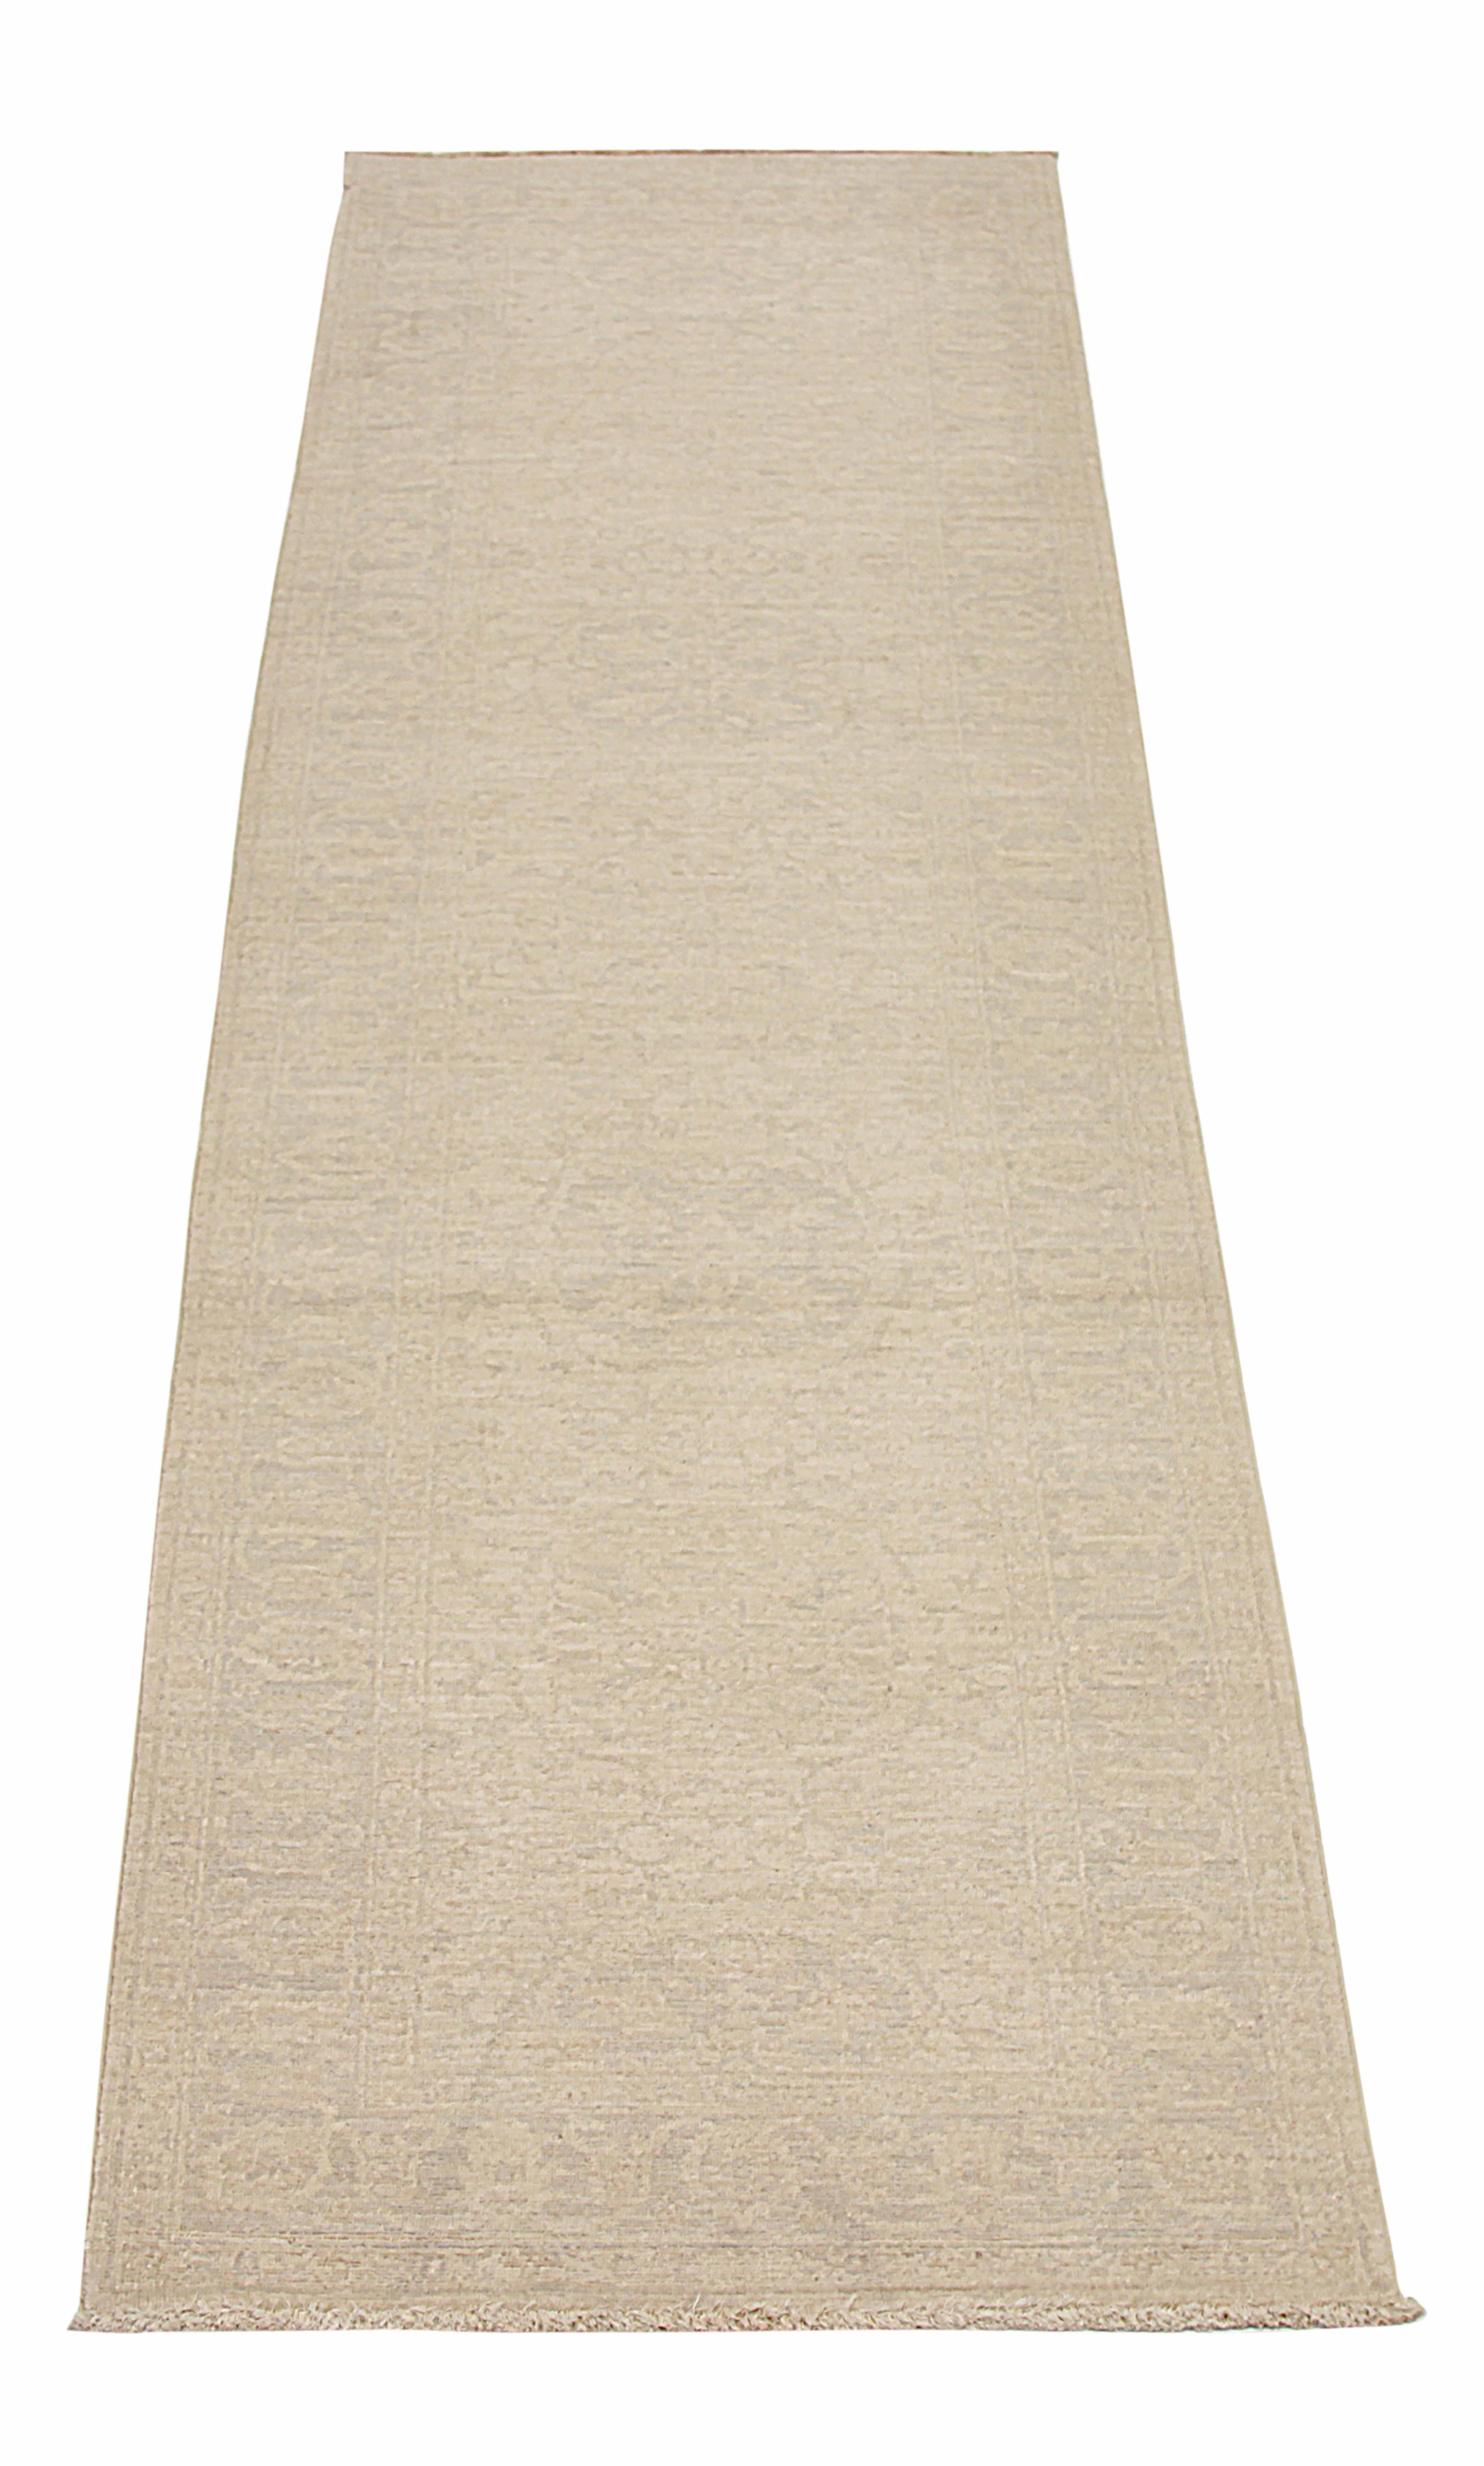 Runner rug handwoven from the finest sheep’s wool. It’s colored with all-natural vegetable dyes that are safe for humans and pets. It’s a traditional Tabriz design handwoven by expert artisans. It’s a lovely runner rug that can be incorporated with